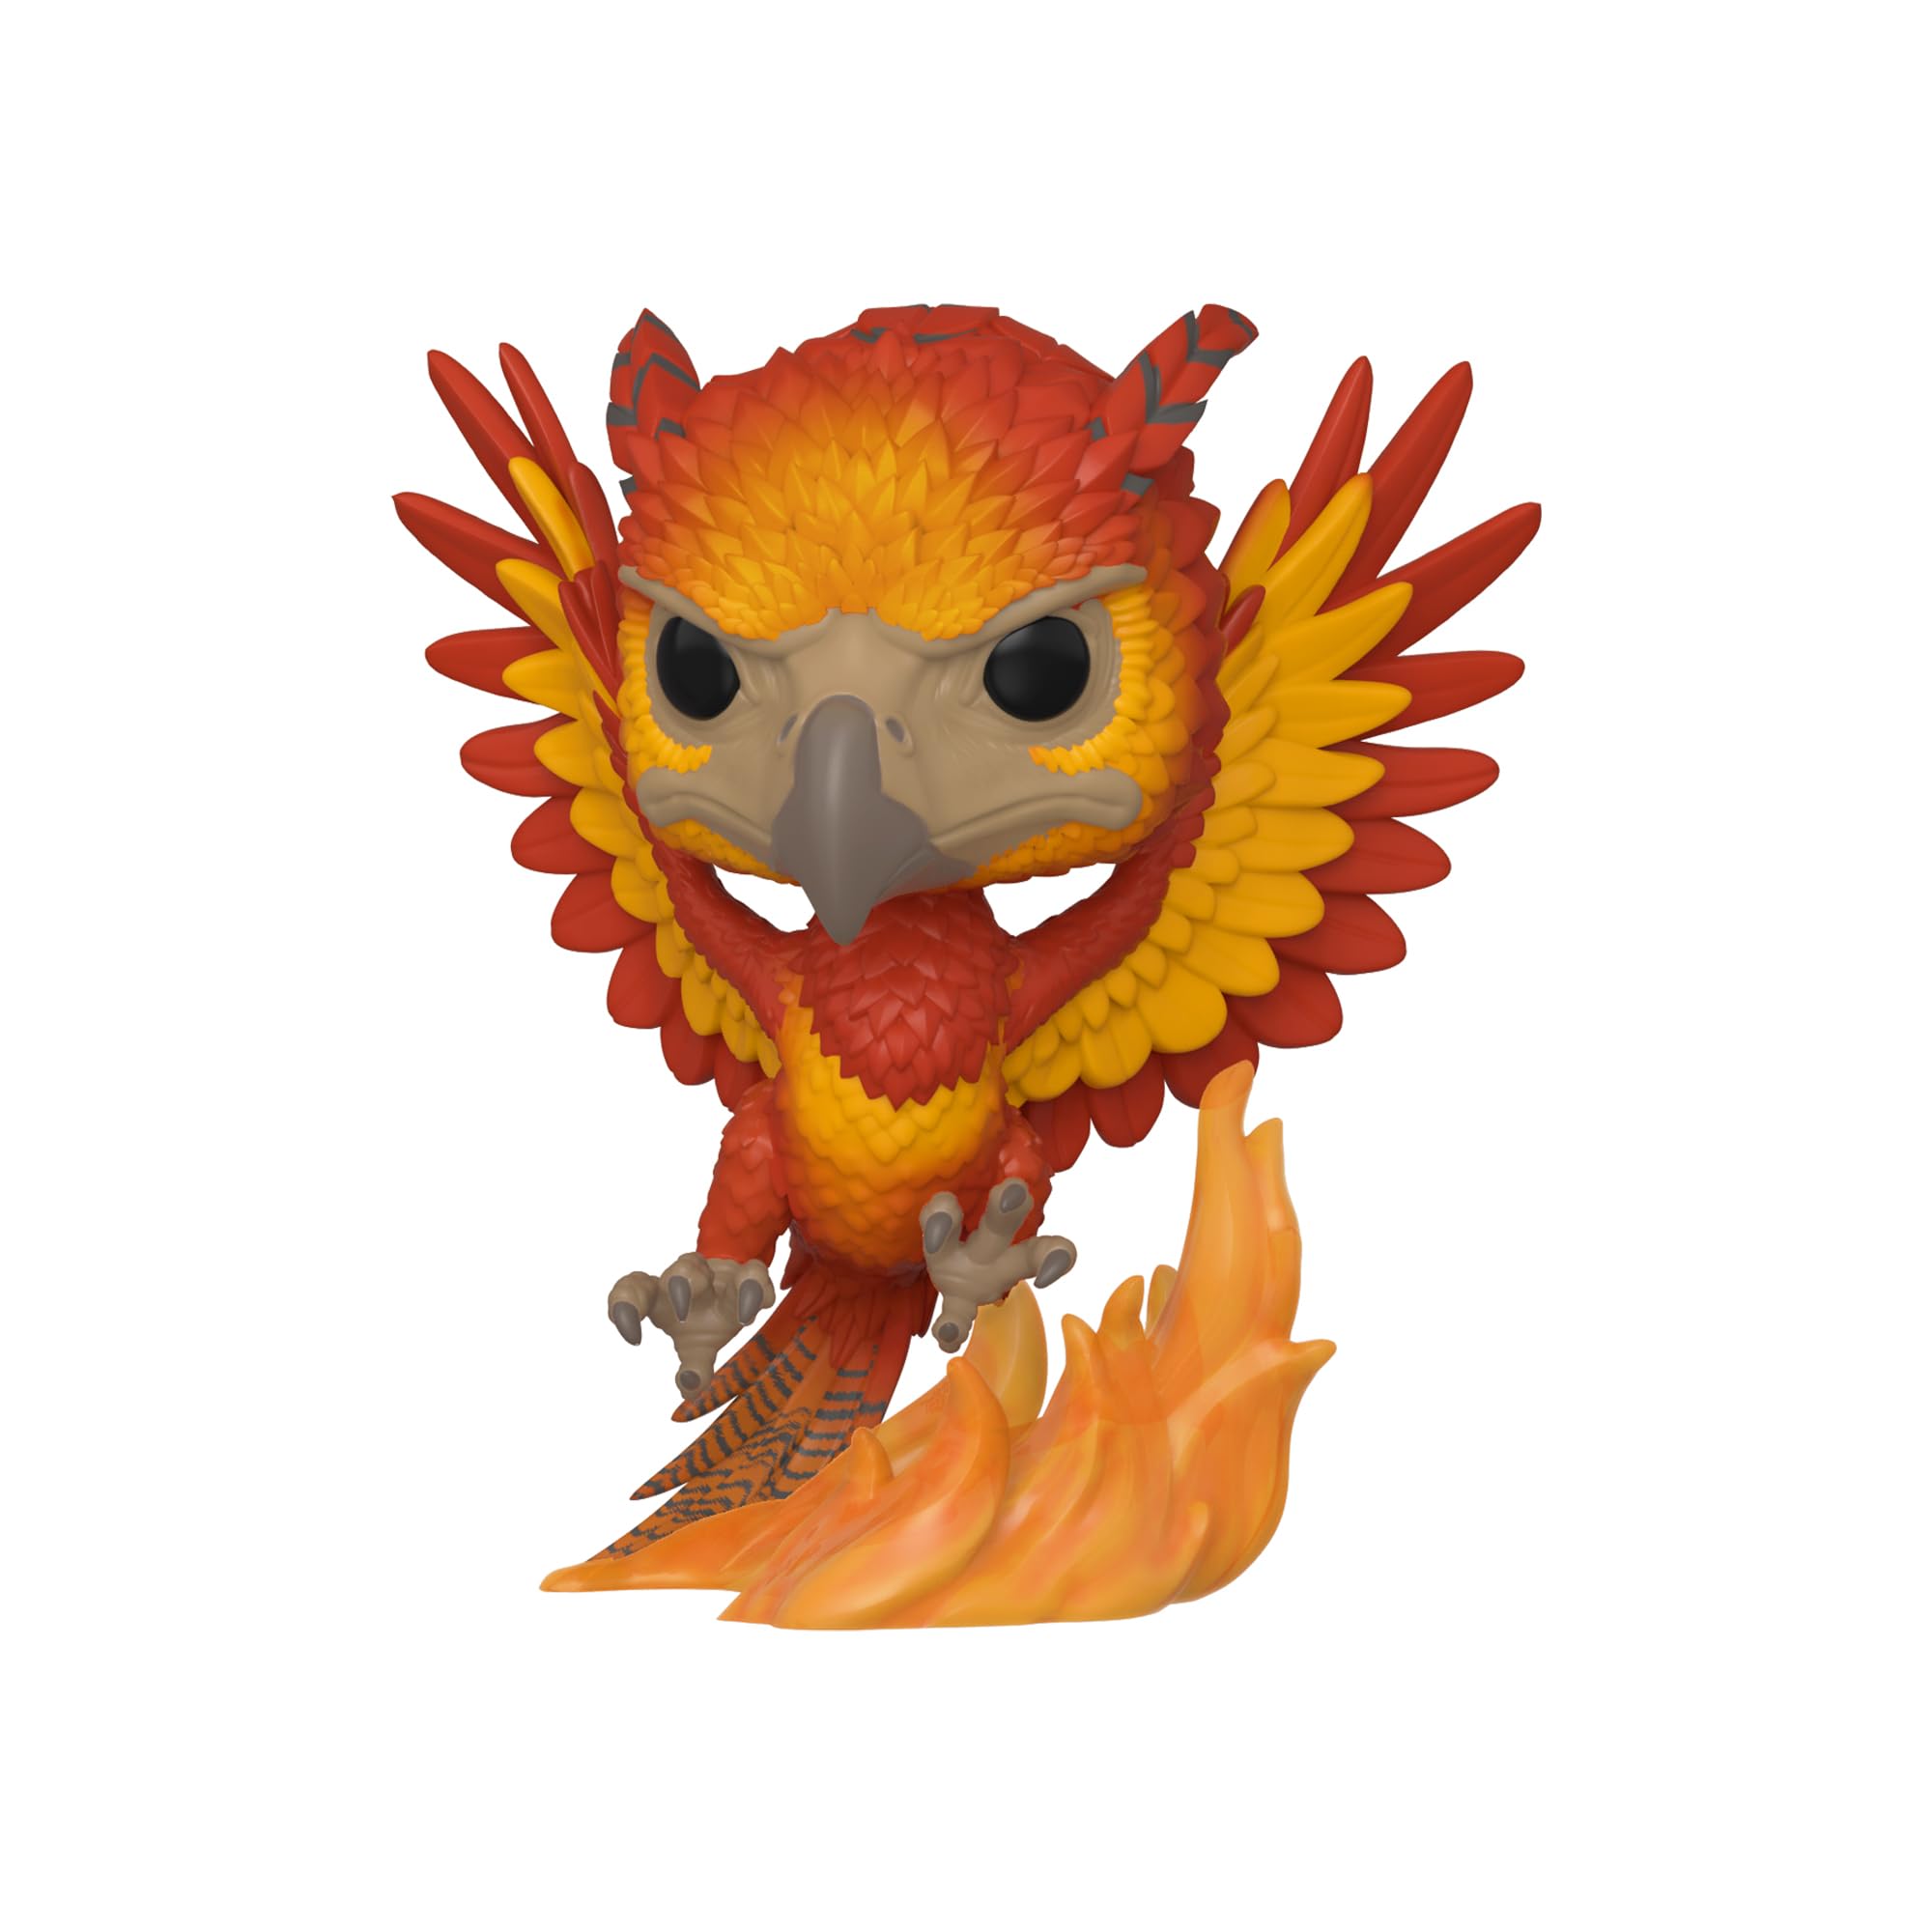 Funko POP! Harry Potter: Fawkes - Collectible Vinyl Figure - Gift Idea - Official Merchandise - for Kids & Adults - Movies Fans - Model Figure for Collectors and Display